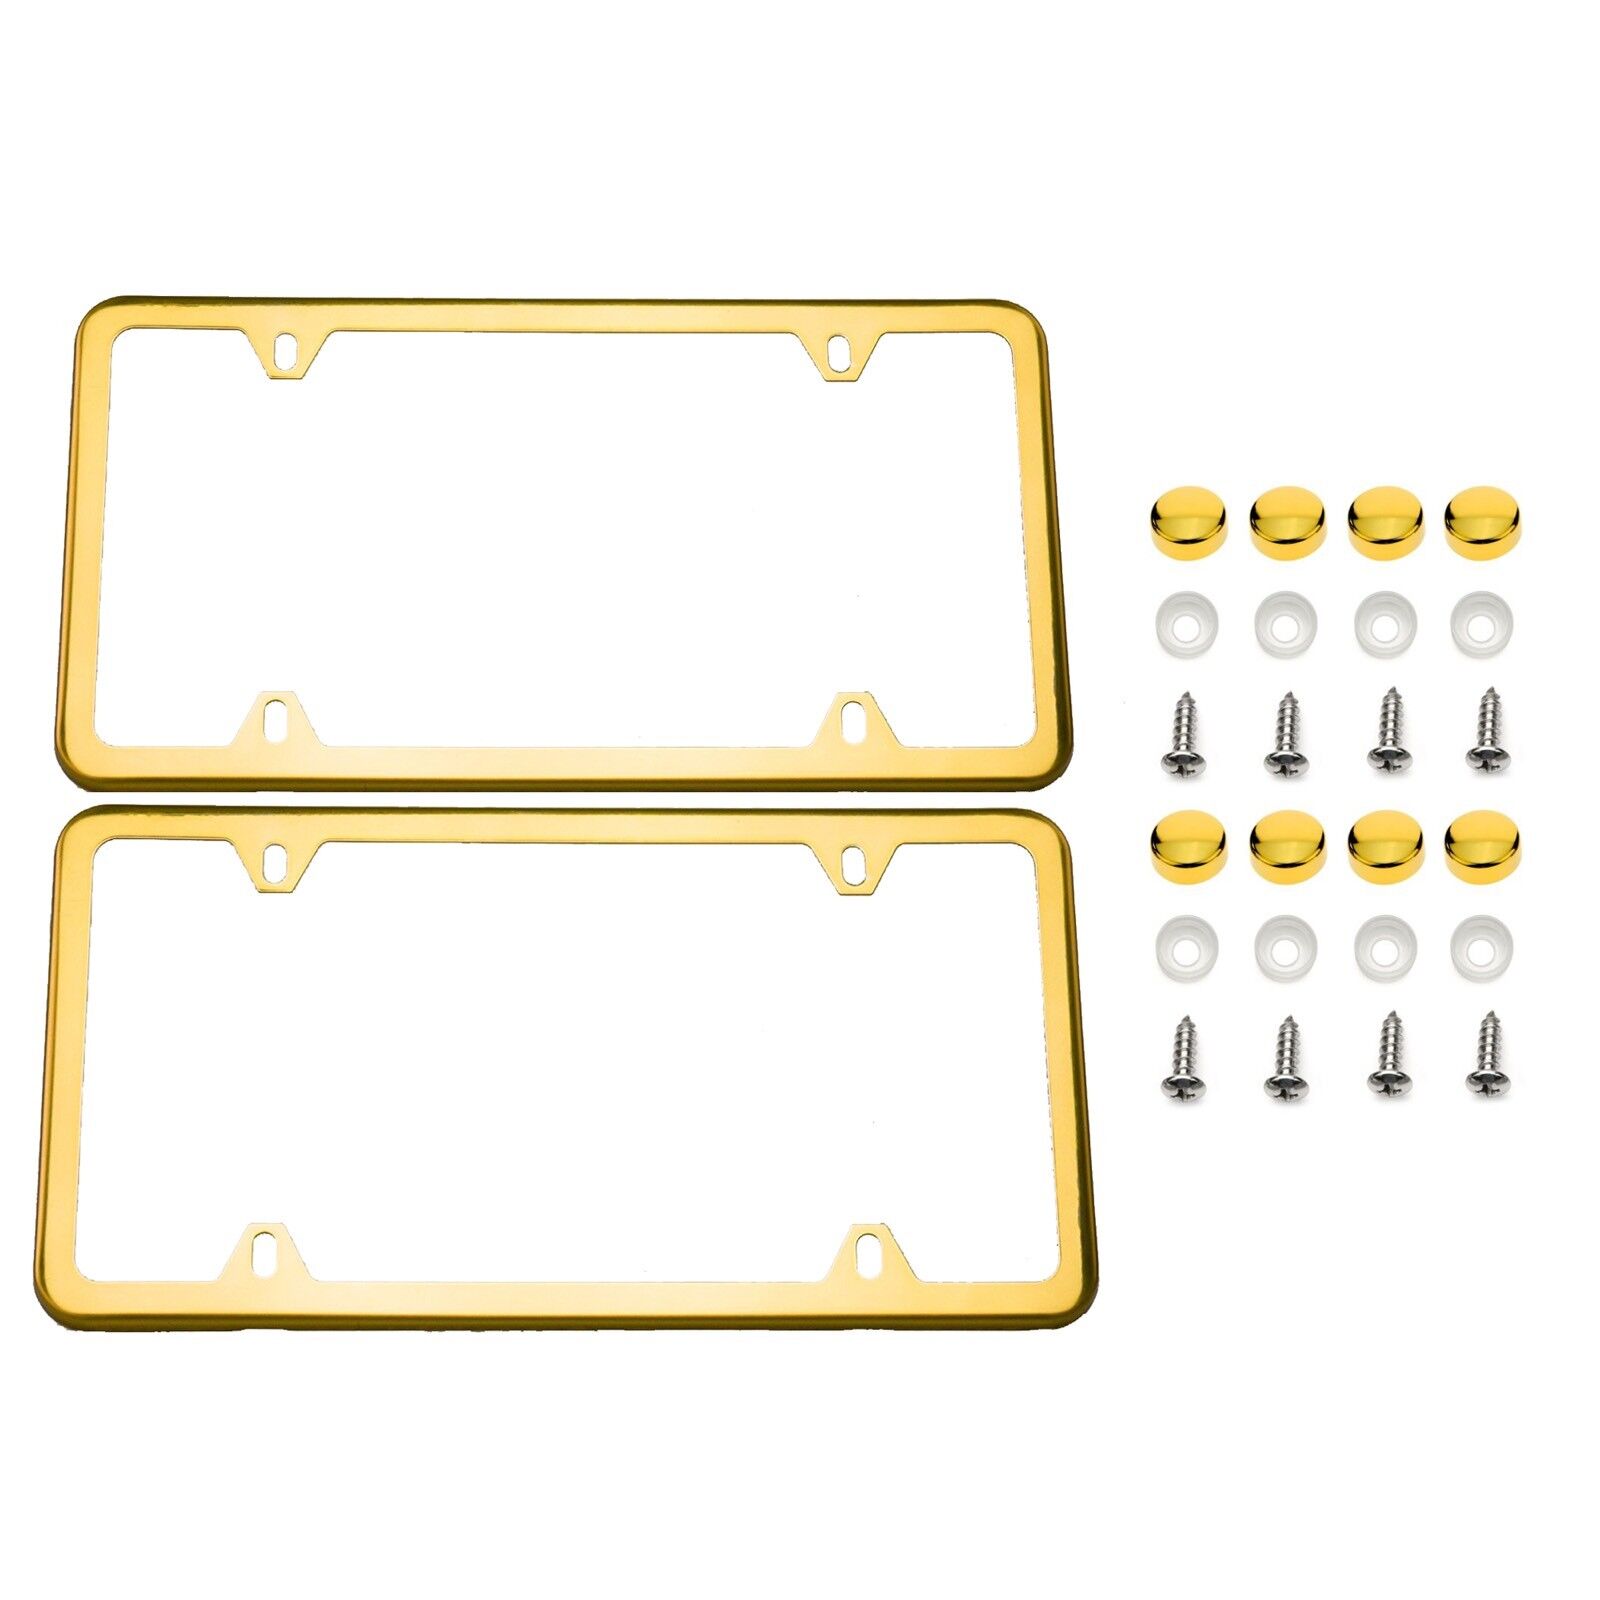 2PCS SLIM 24k Gold Plated STAINLESS STEEL LICENSE PLATE FRAME SCREW CAP-4 HOLE